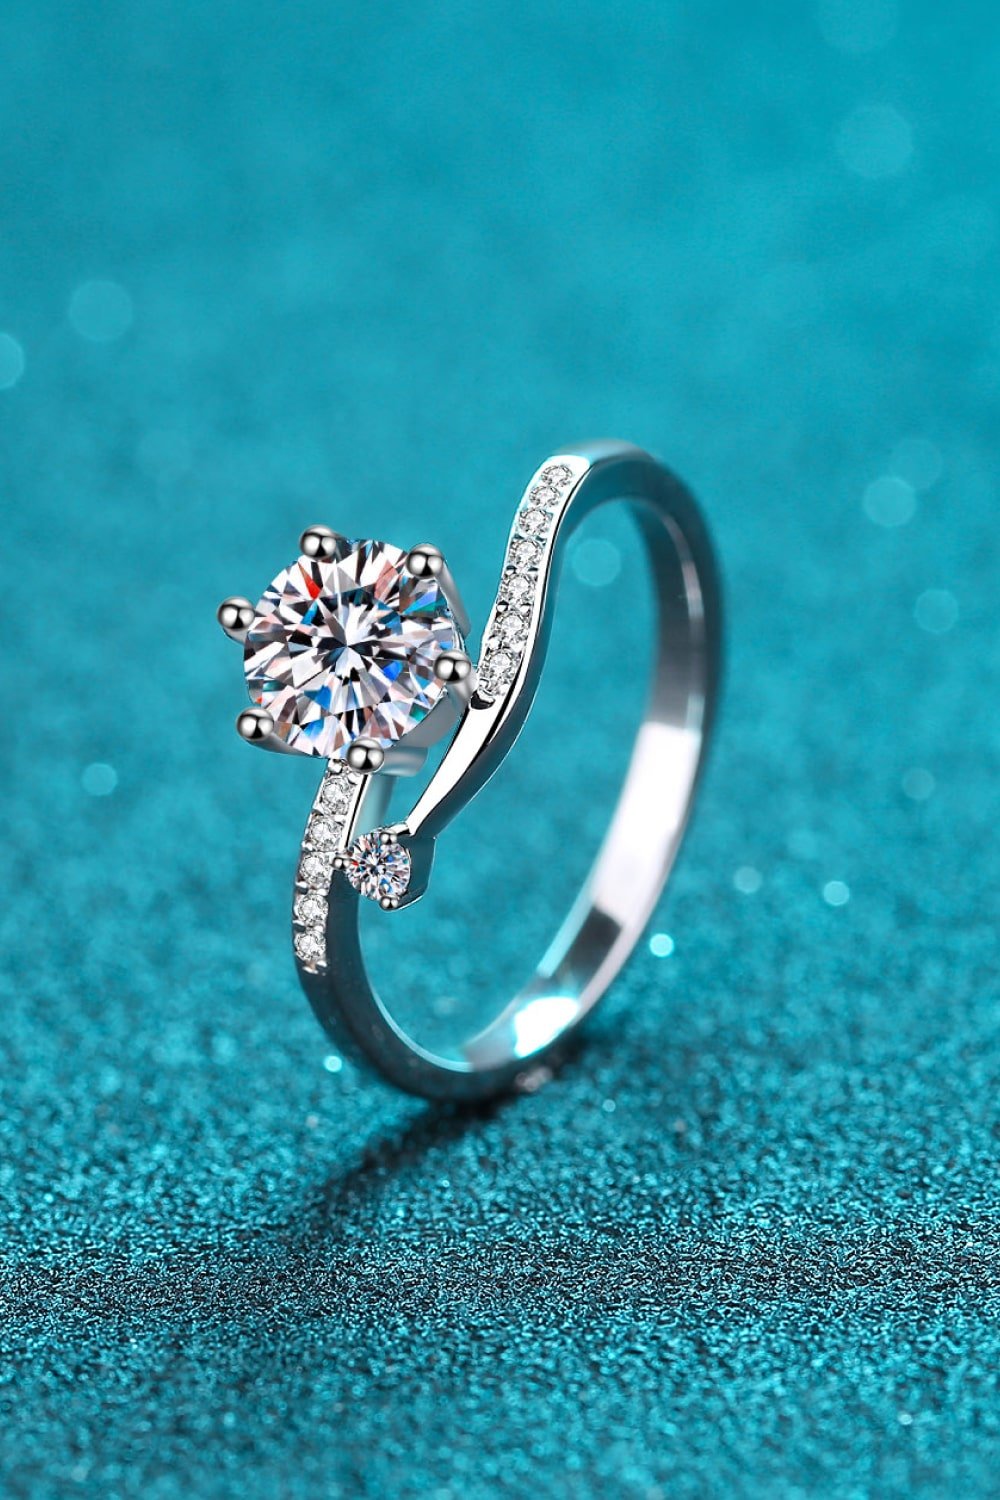 On My Mind 925 Sterling Silver Moissanite Ring - Ziemay